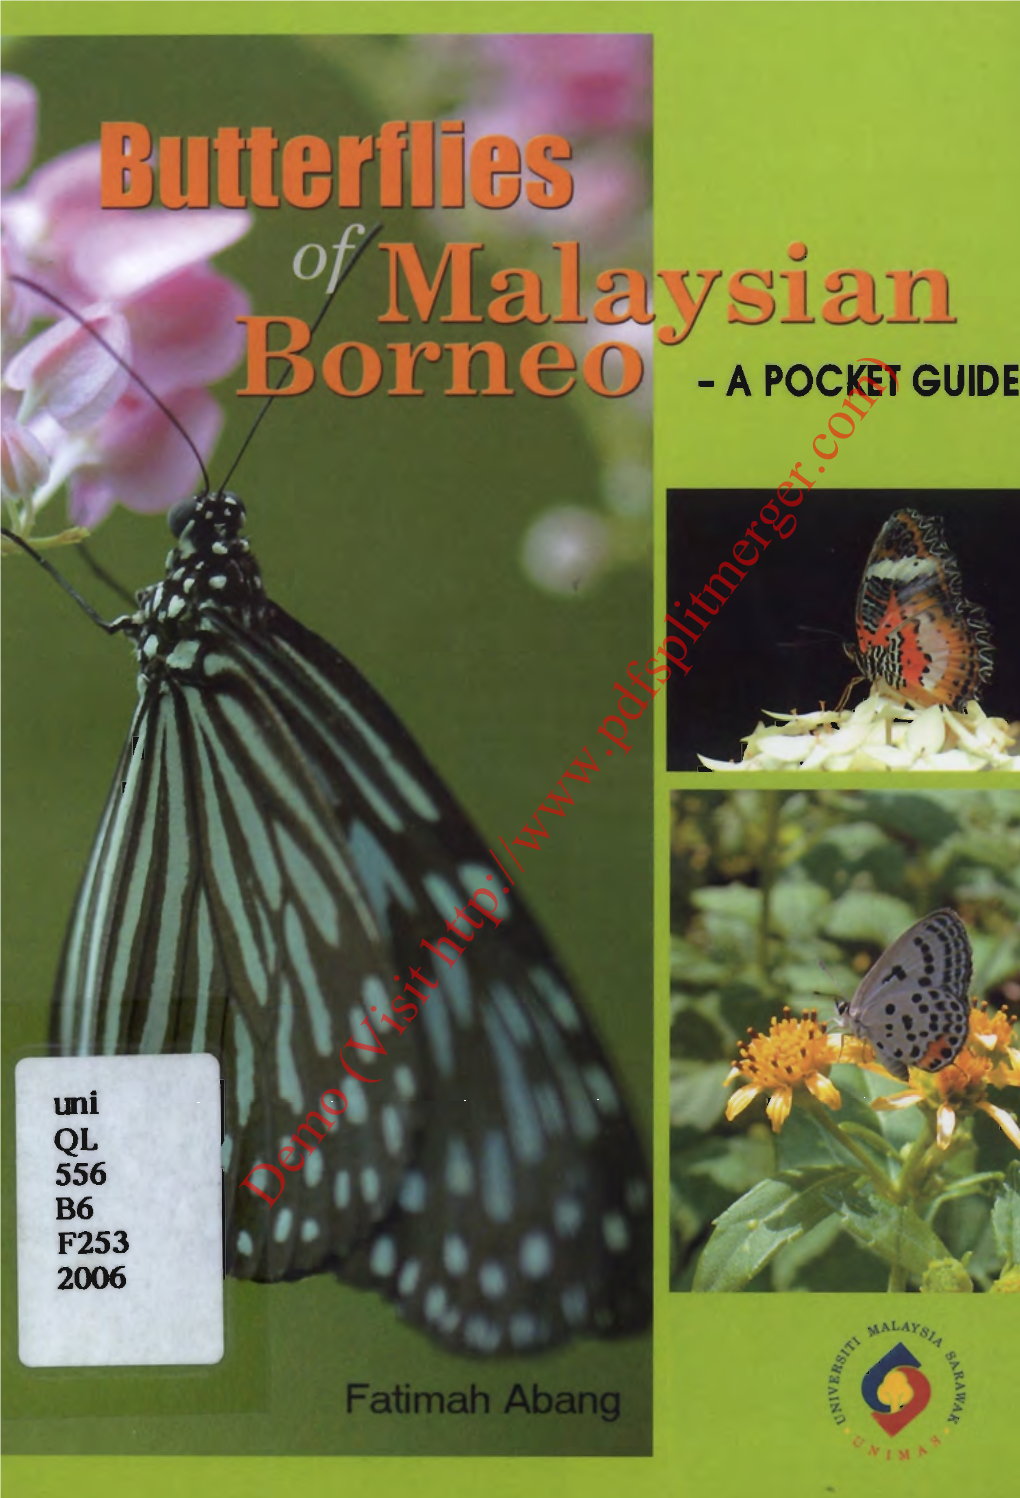 Butterflies of Malaysian Borneo : a Pocket Guide / Fatimah Abang Includes Index Bibliography: ISBN 983-9257-65-X 1